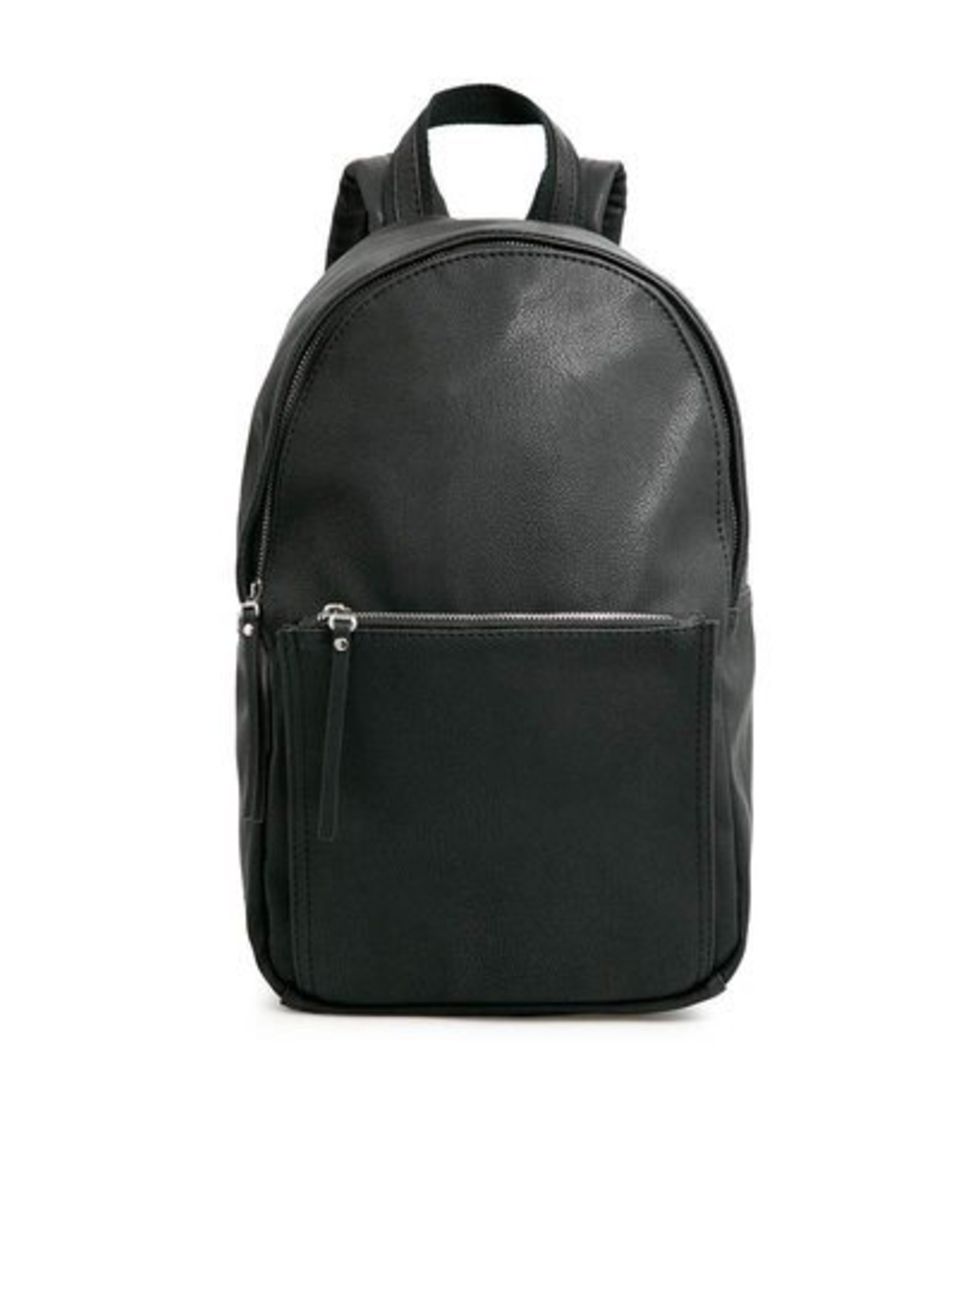 Practical Fashion. Backpack, £44.99 from Mango